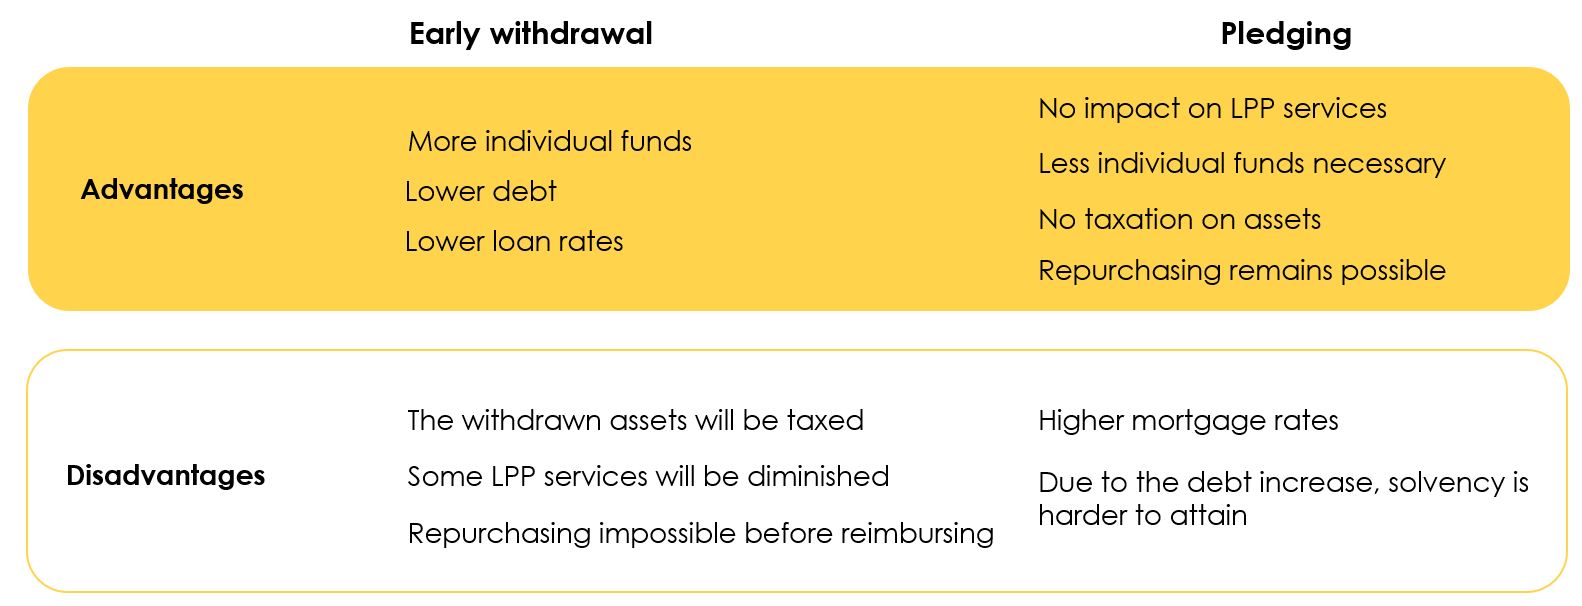 Advantages and disadvantages of a 2nd pillar withdrawal compared to a 2nd pillar pledge 